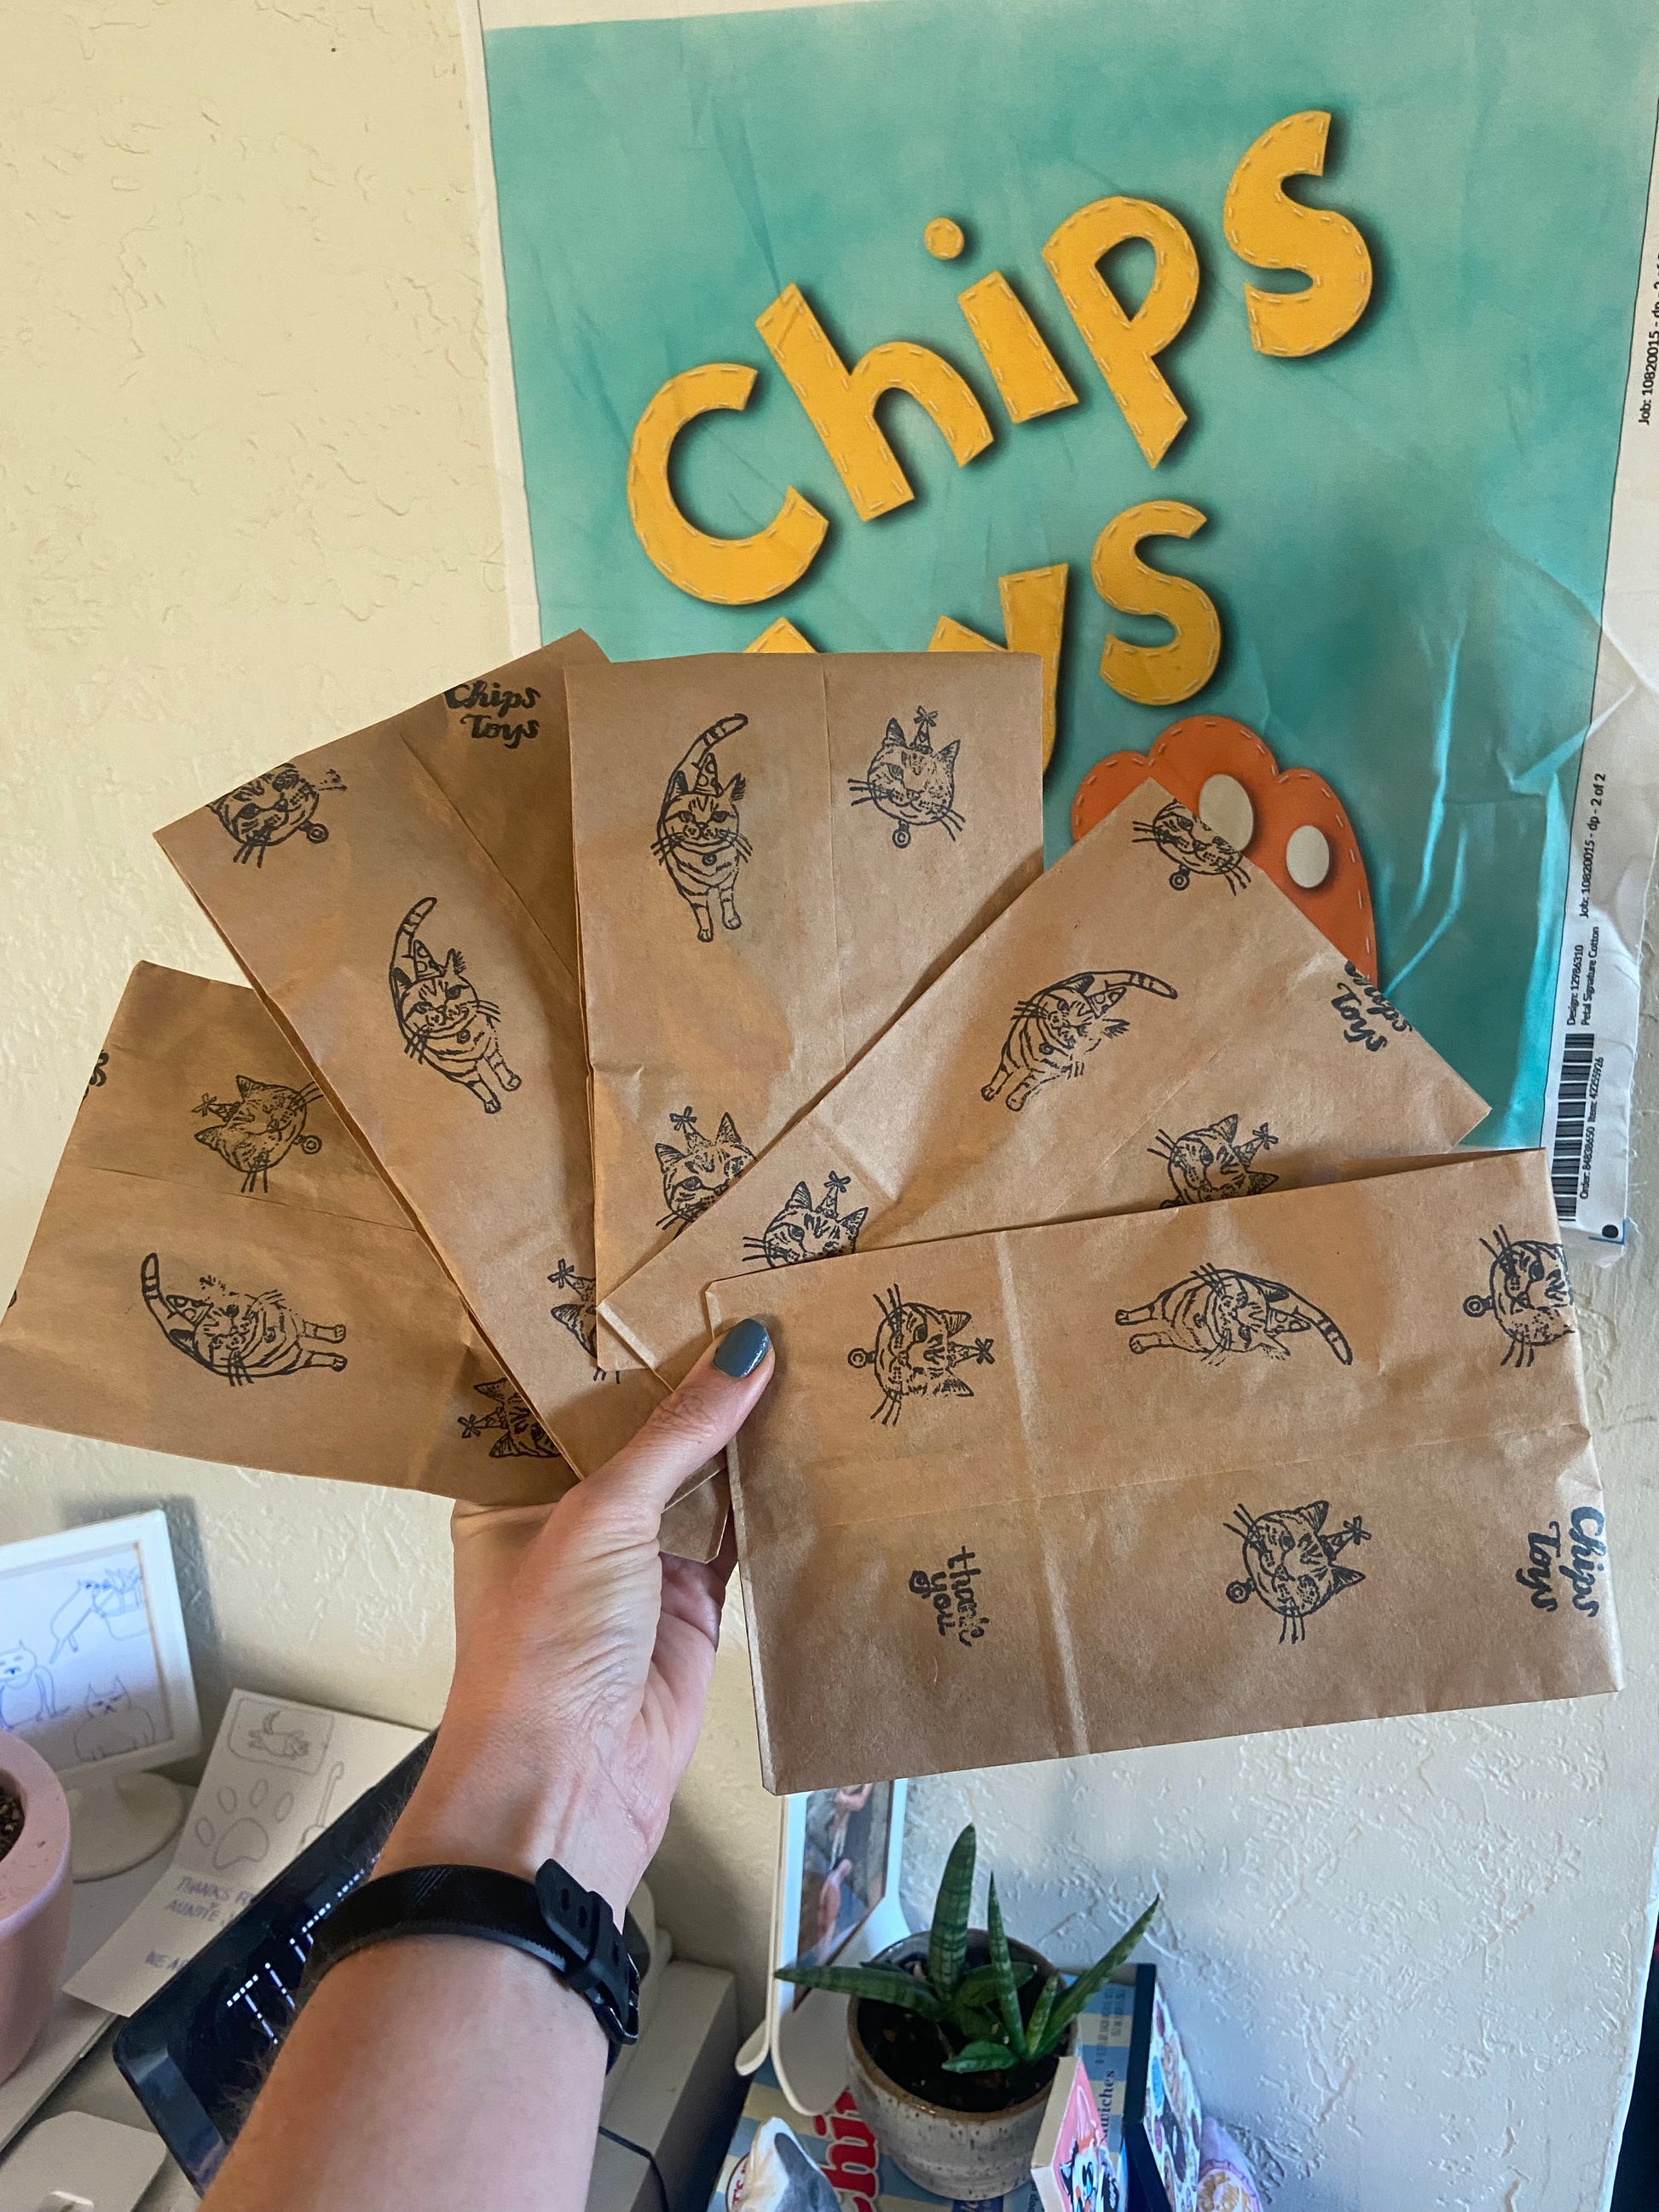 A person holding five brown paper bags with stamps of cats on them. In the background there is a blue banner on the wall that says "Chips Toys".